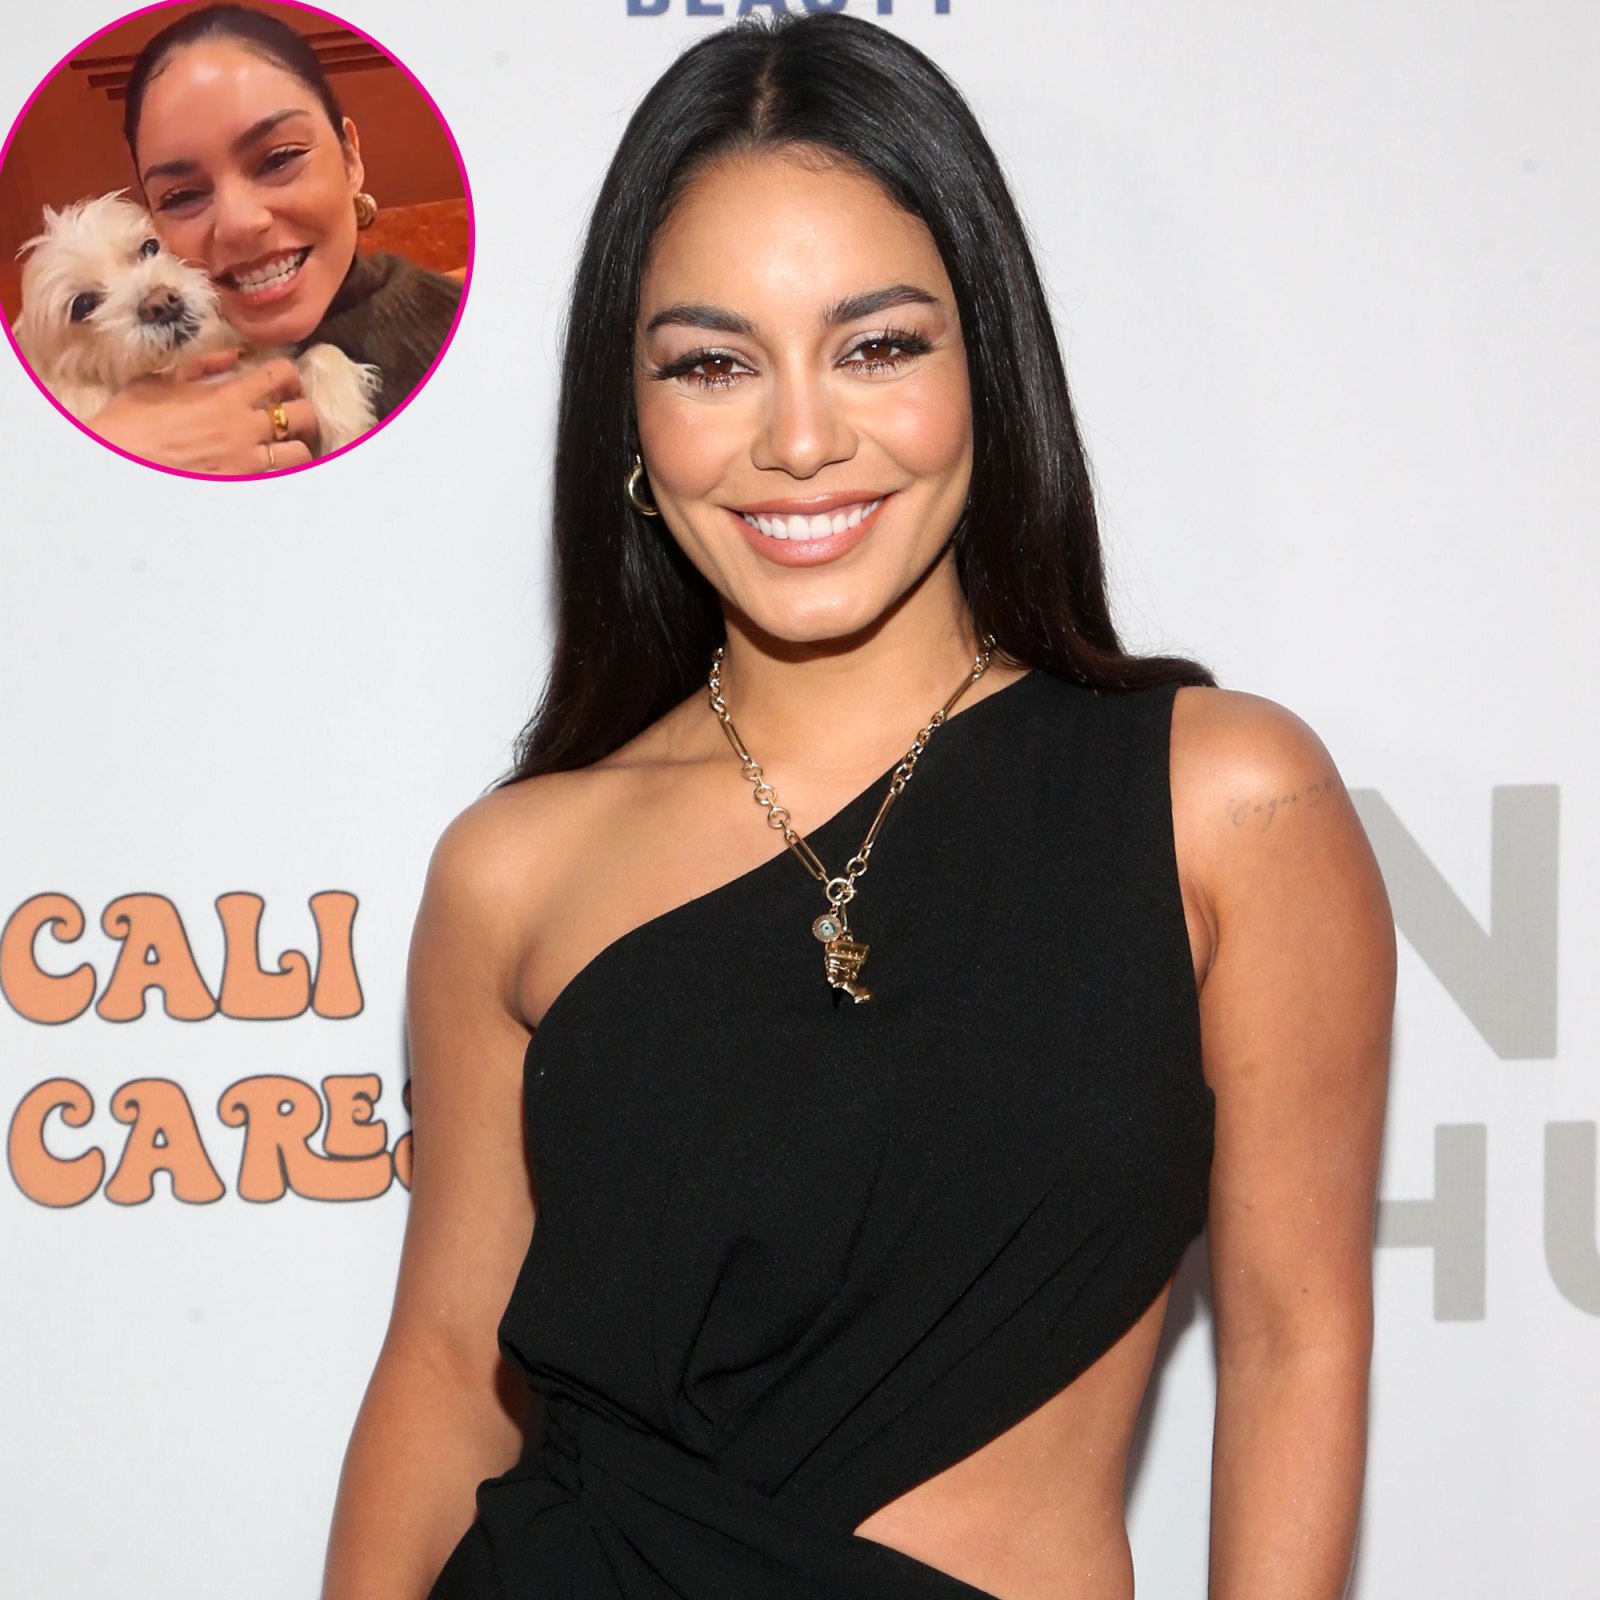 Vanessa Hudgens and More Stars Share Cute Pics With Beloved Pets